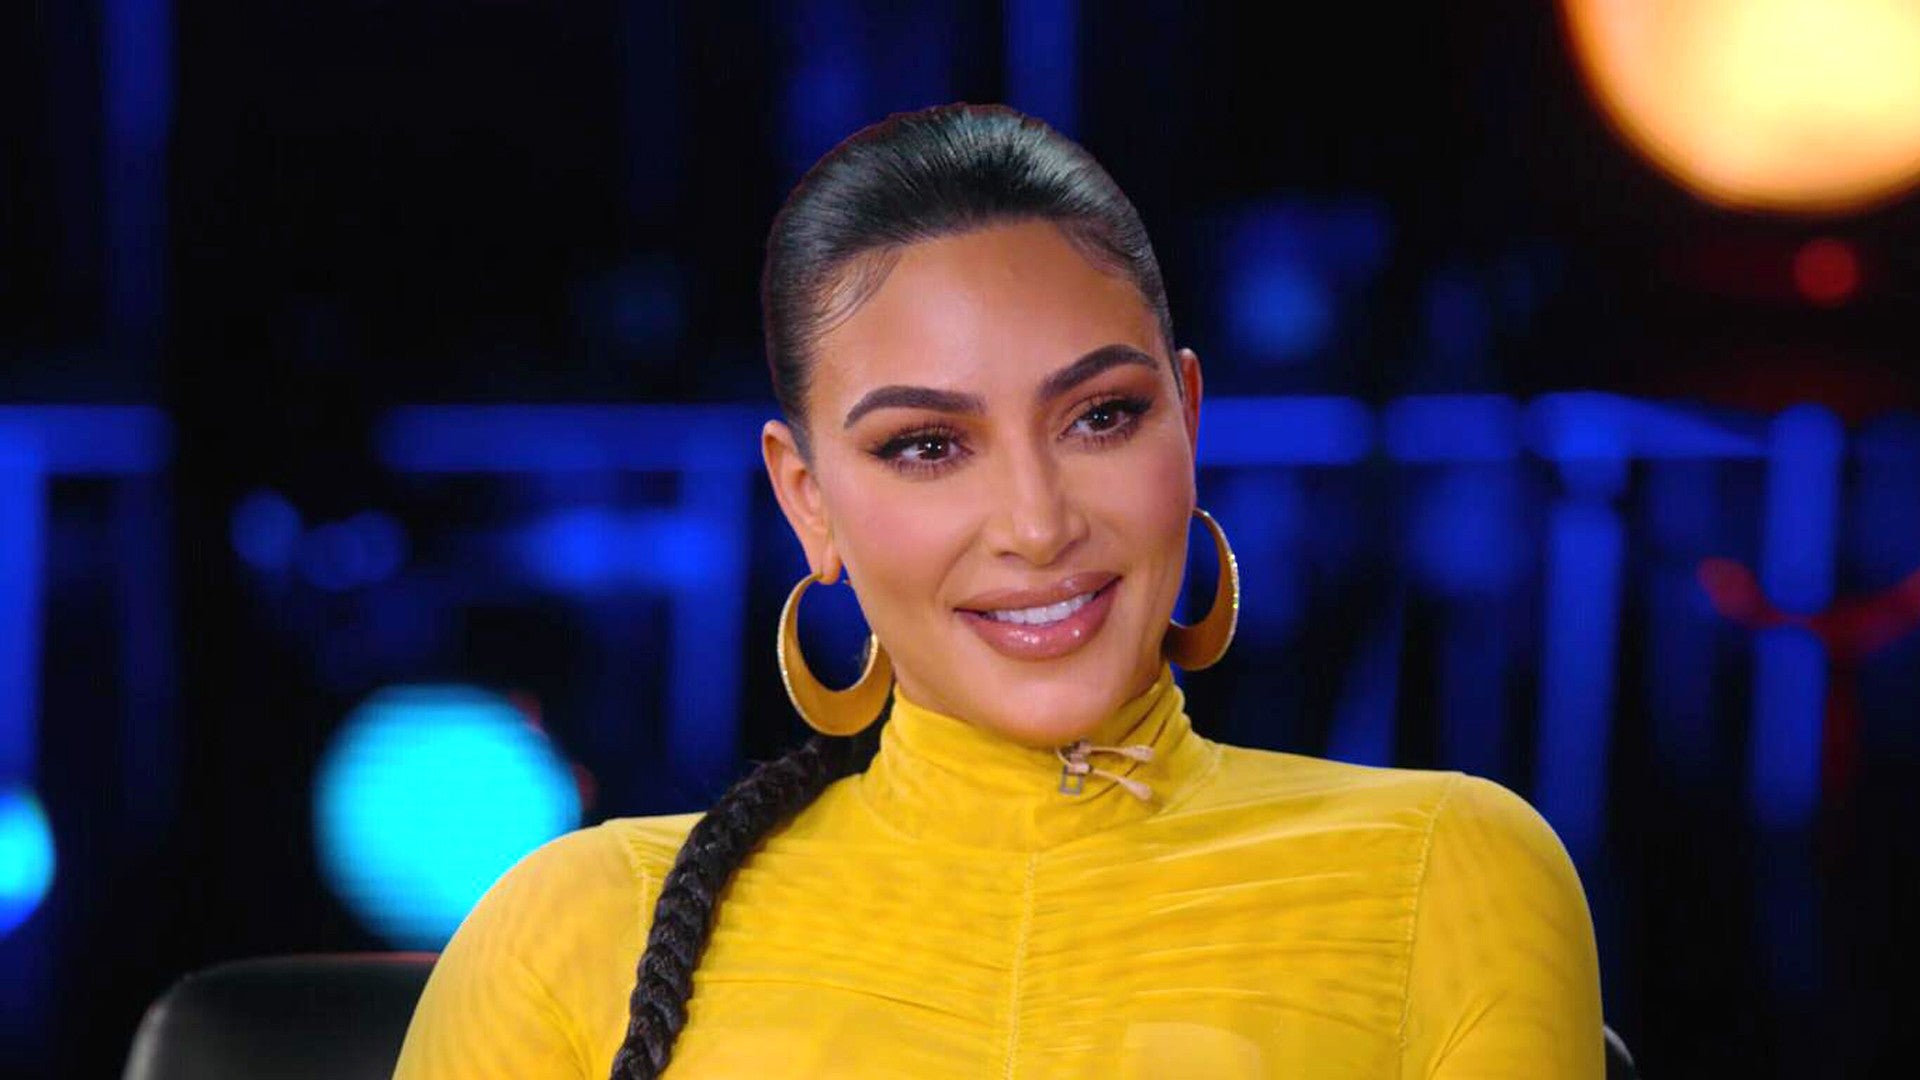 Kim Kardashian Was Interviewed By David Letterman And It’s The Best Thing On Netflix Right Now